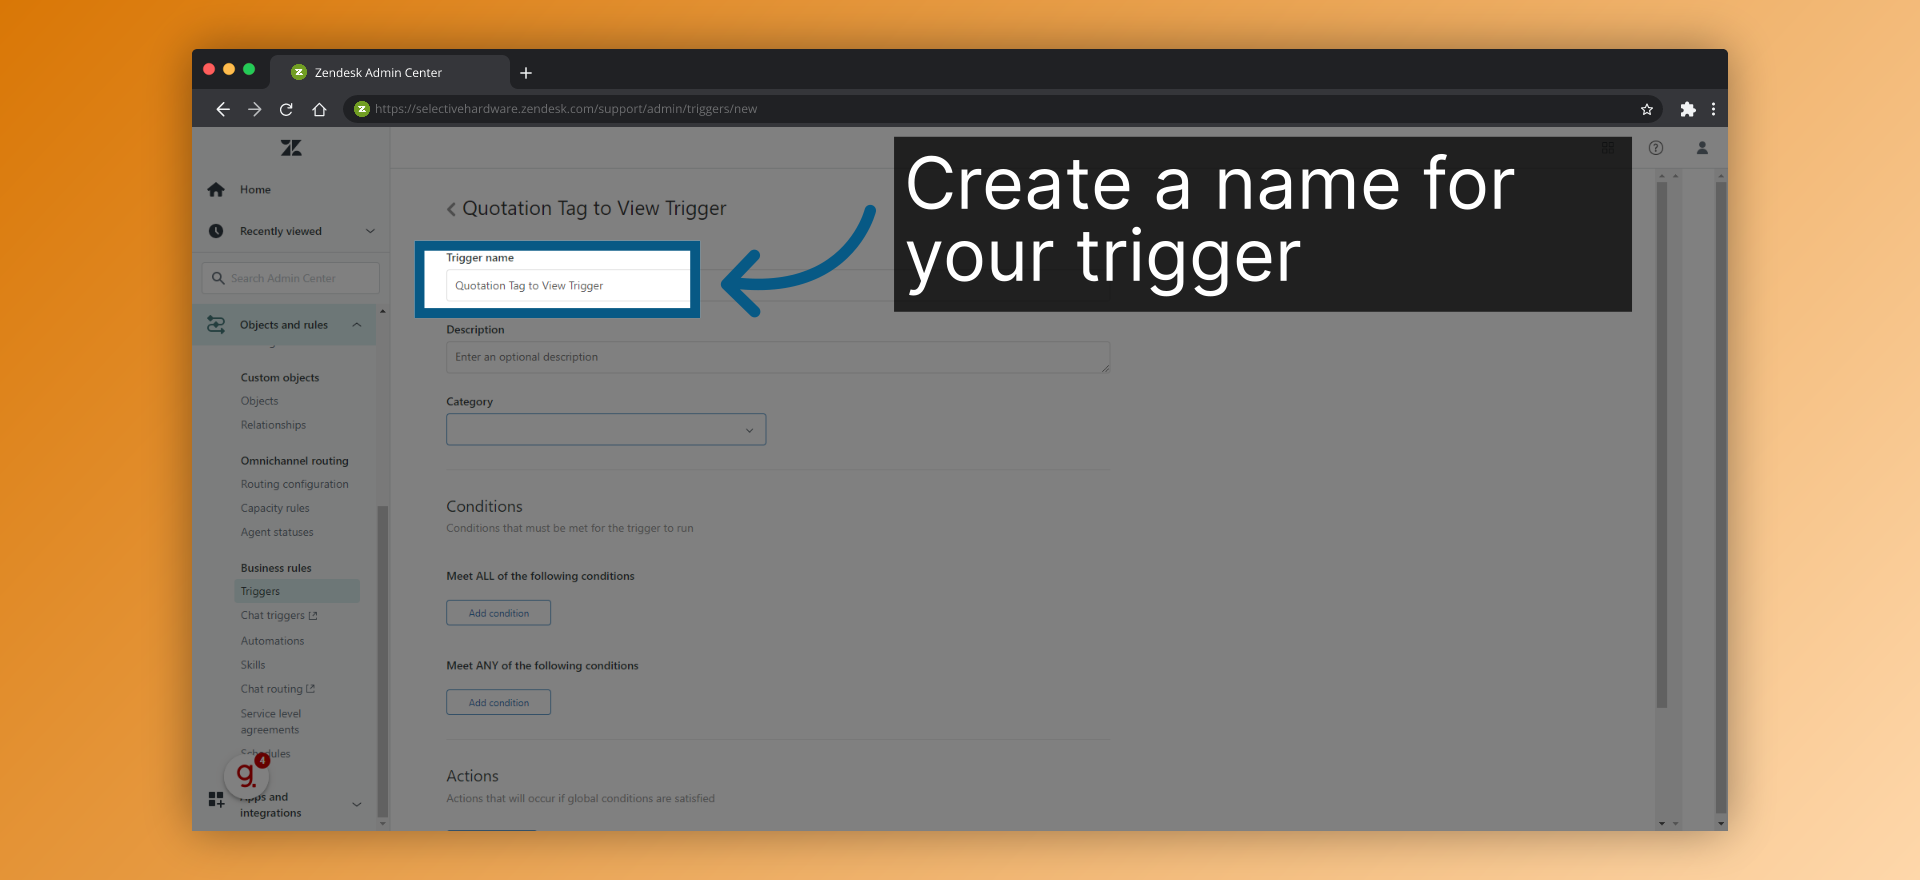 Create a name for your trigger